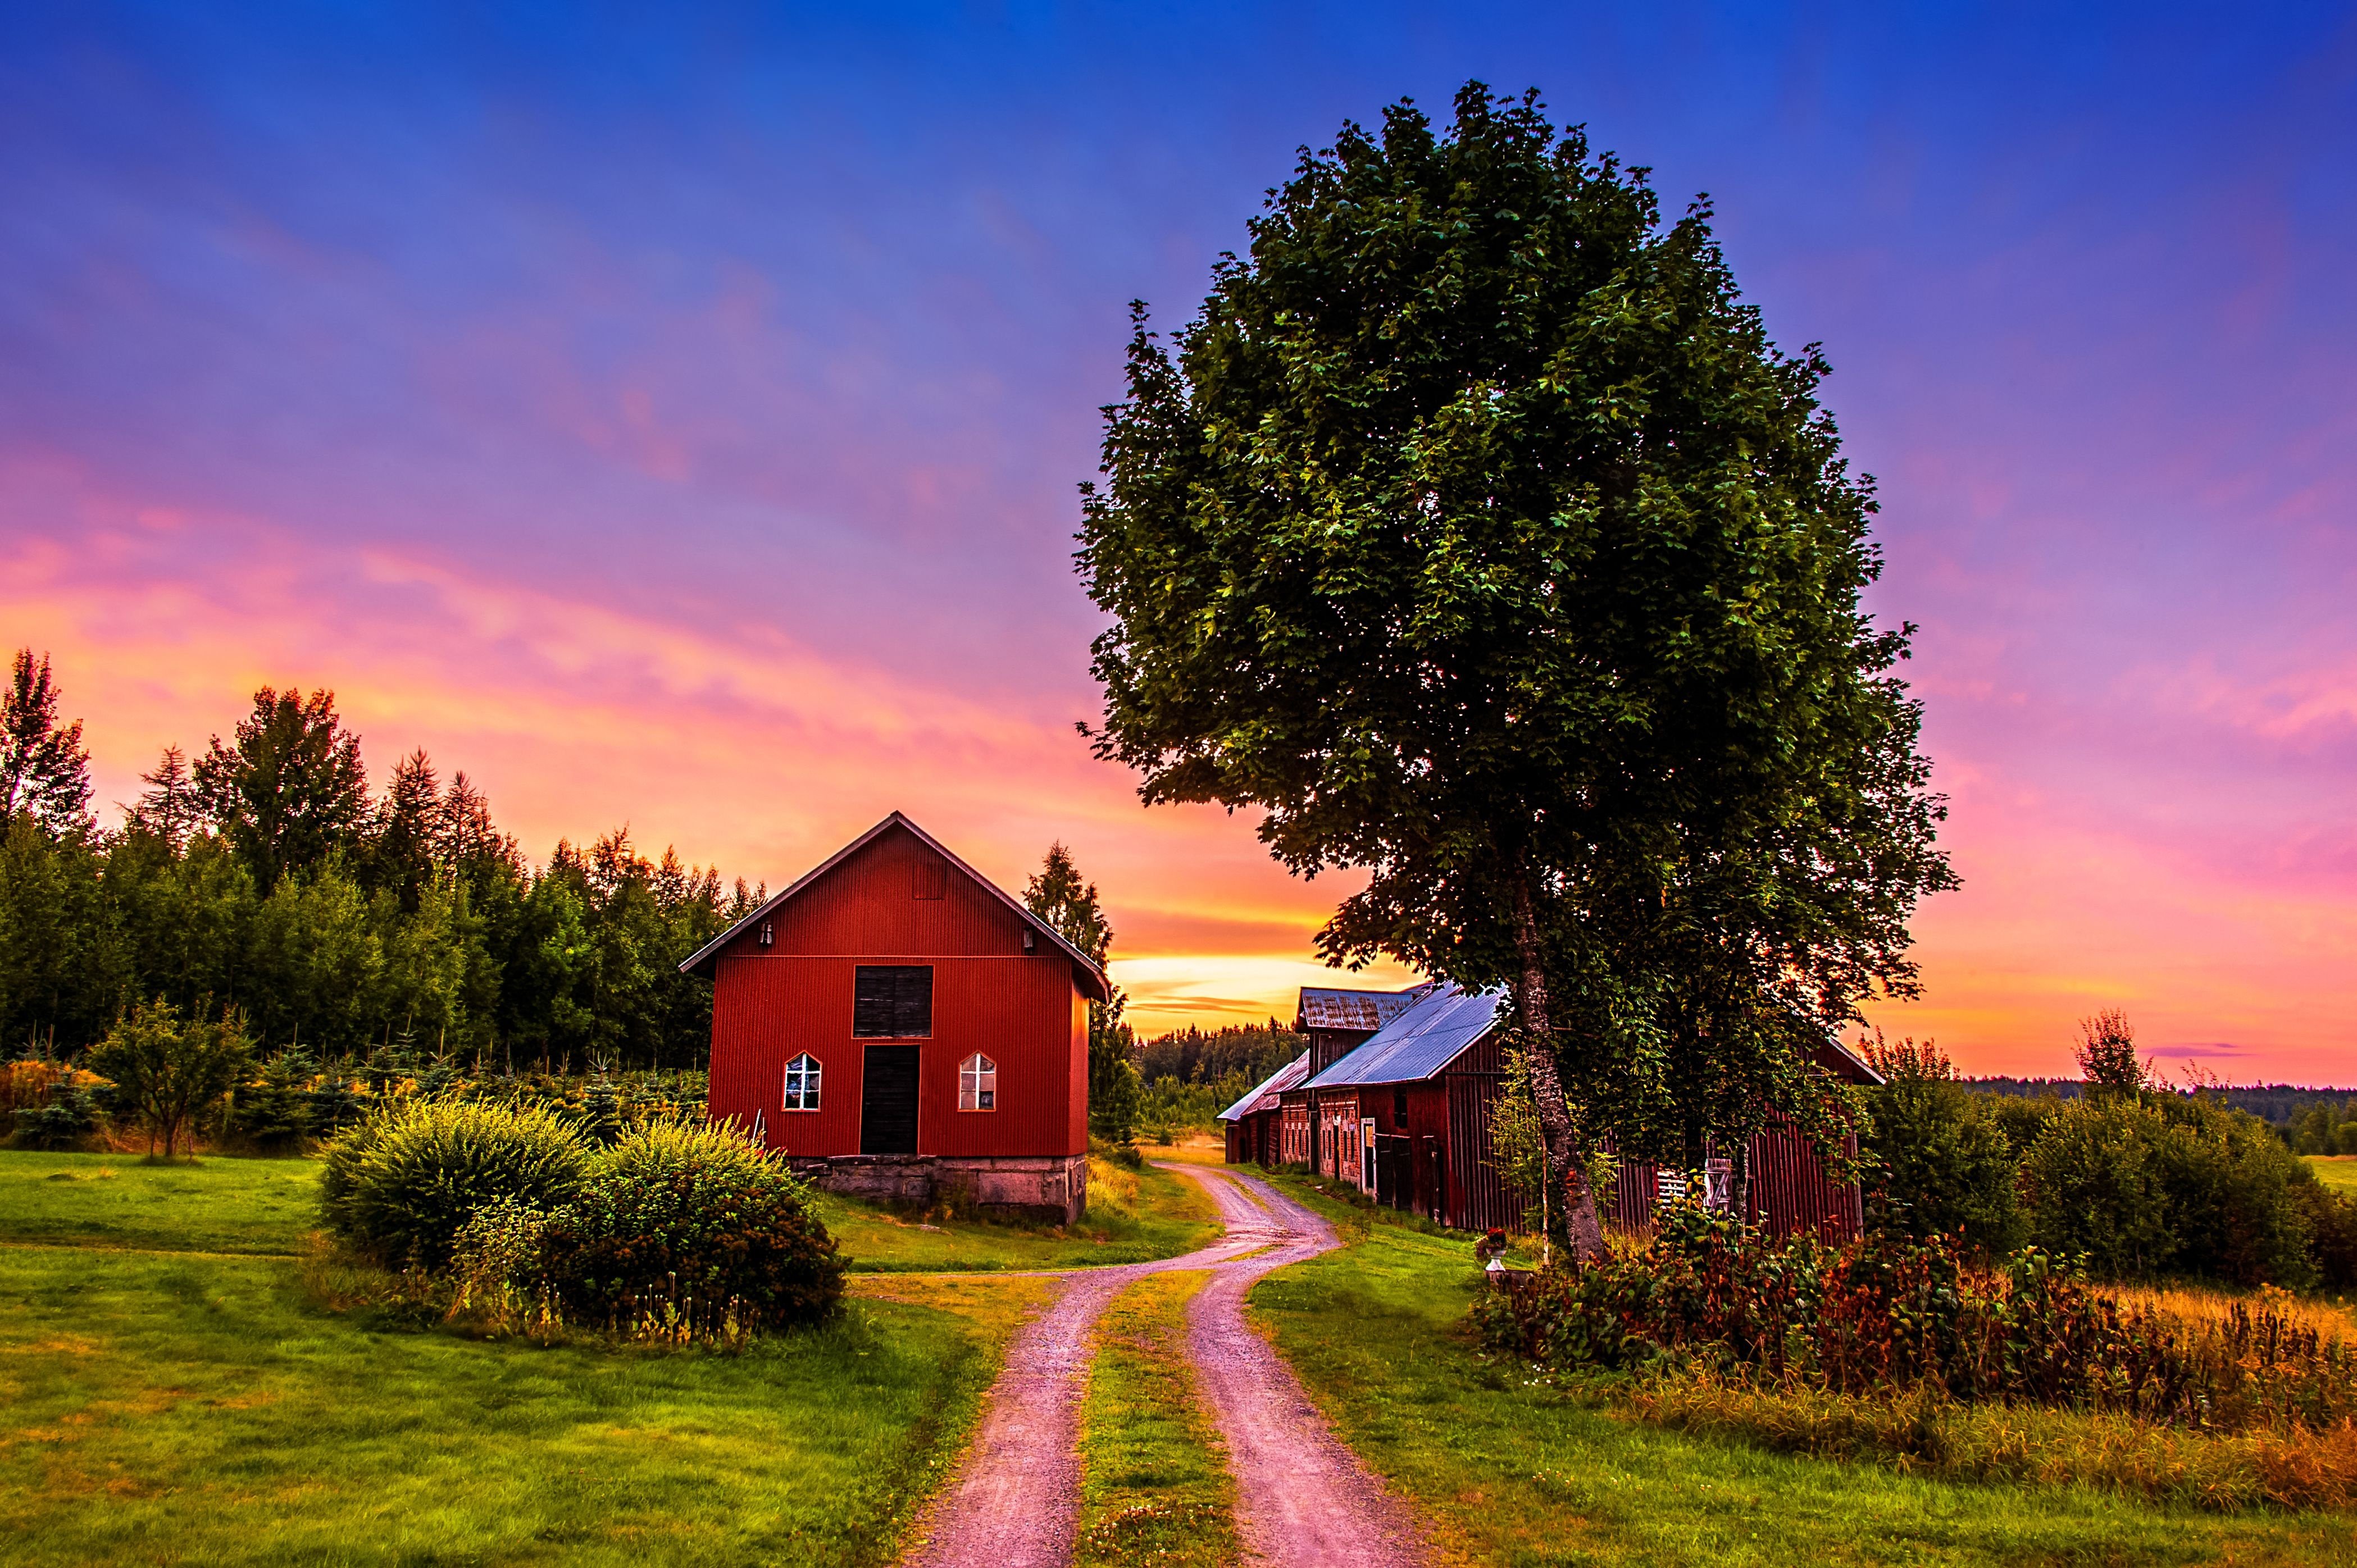 Trees Road Home Landscape Rustic Farm House Wallpaper Background